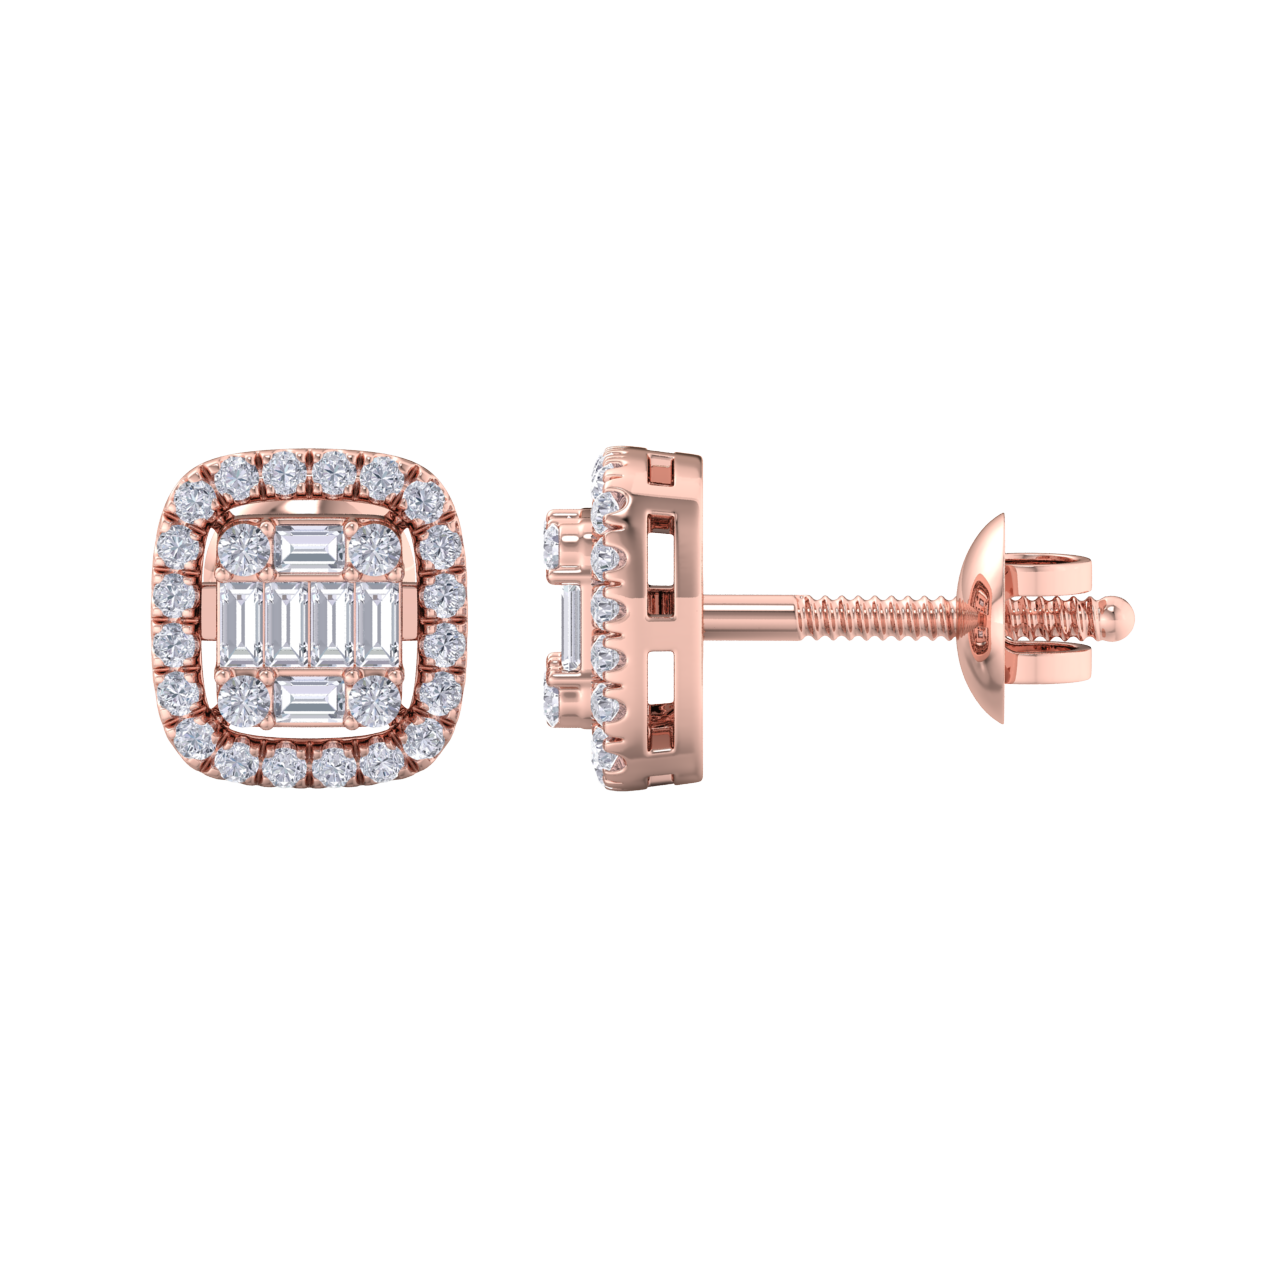 Halo square stud earrings in rose gold with white diamonds of 0.41 ct in weight